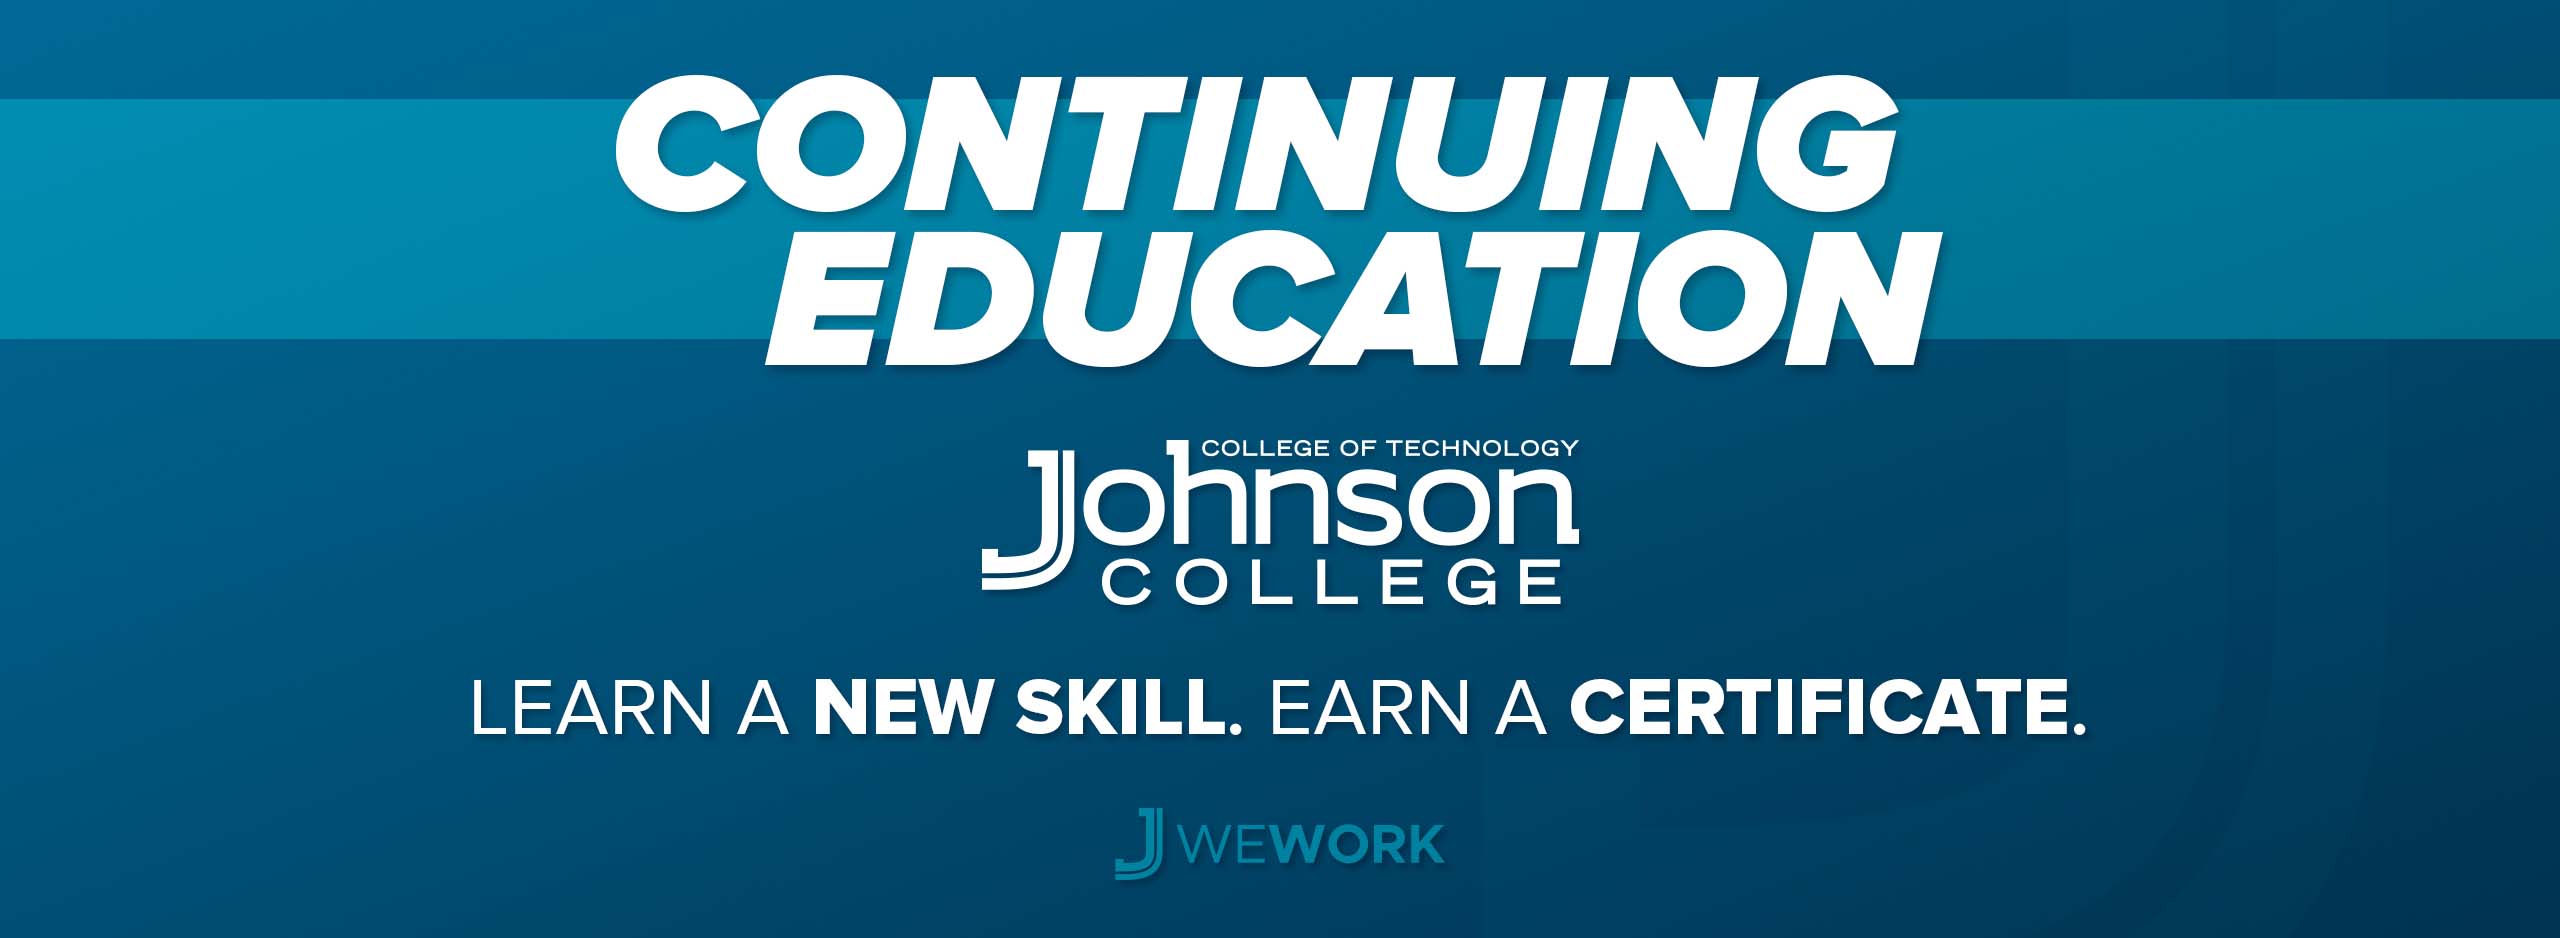 continuing education banner